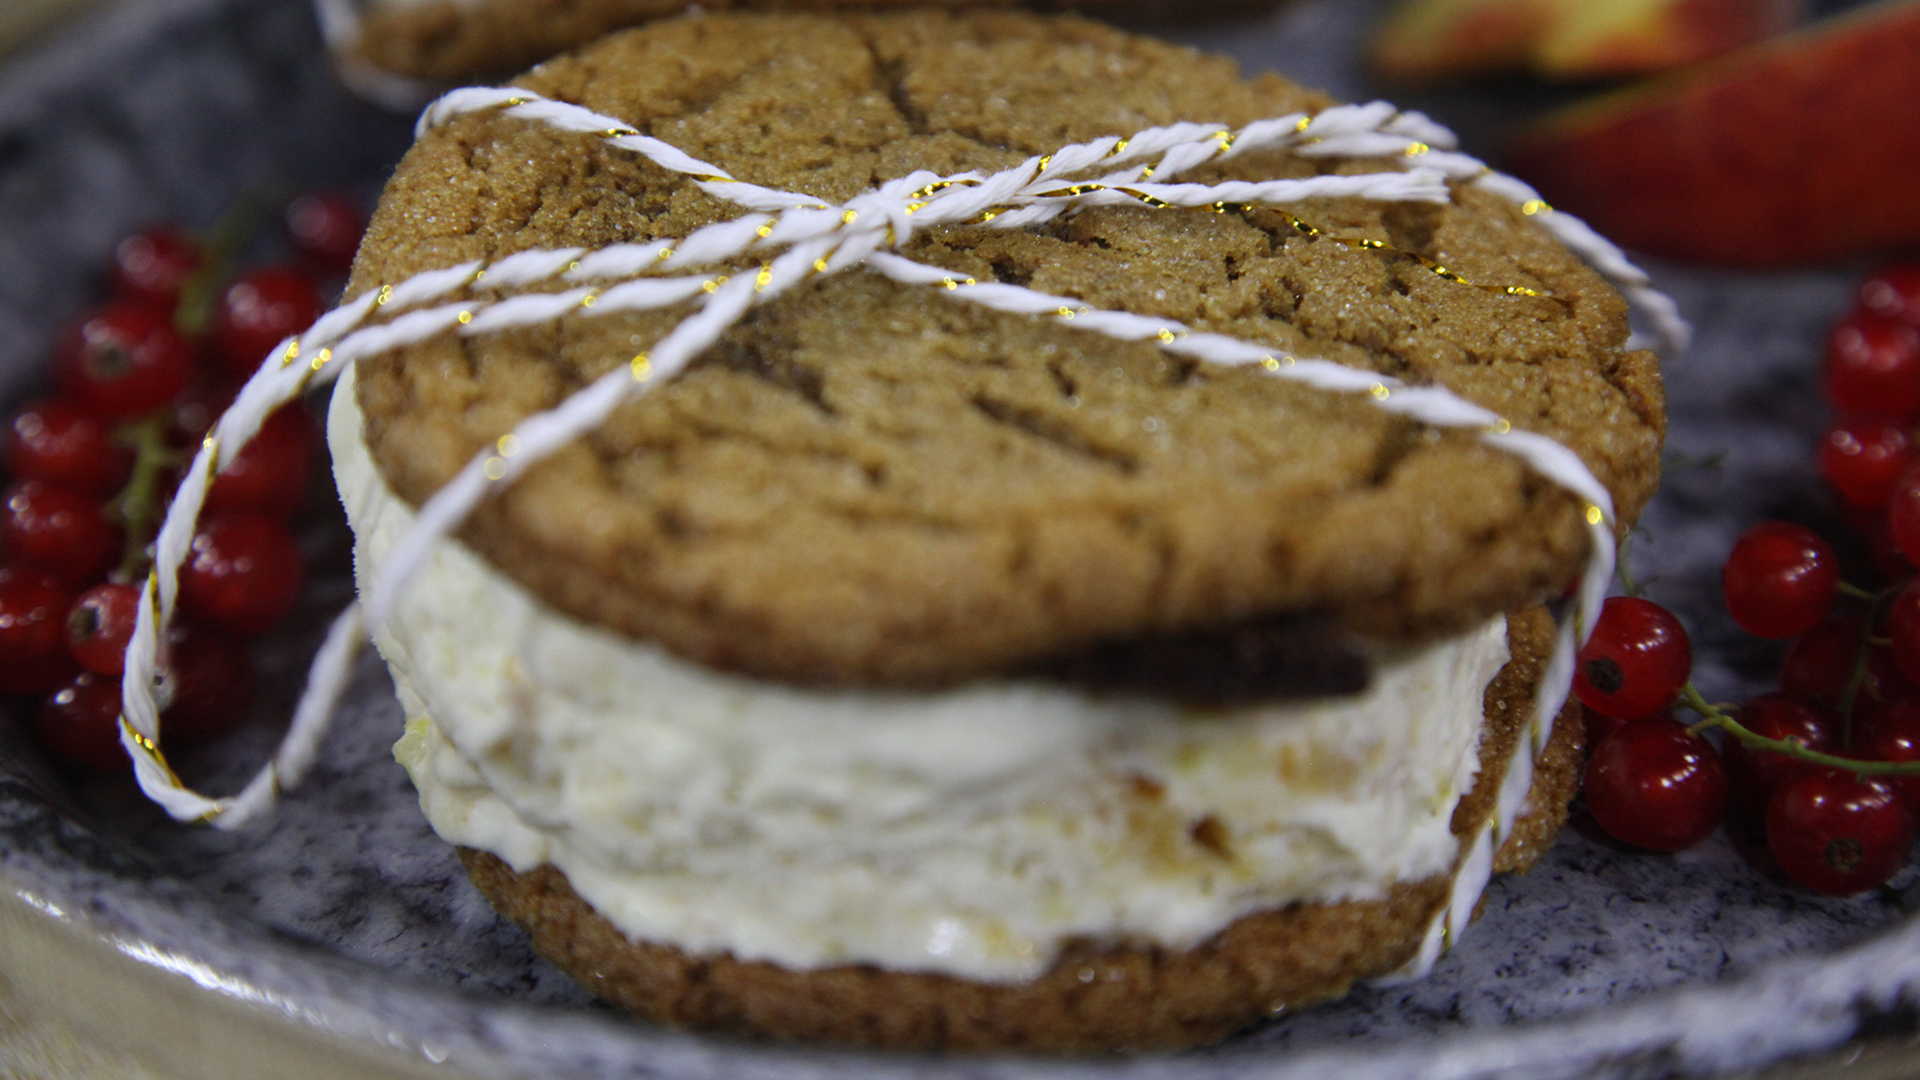 Gingersnap, peach and ginger ice cream sandwiches